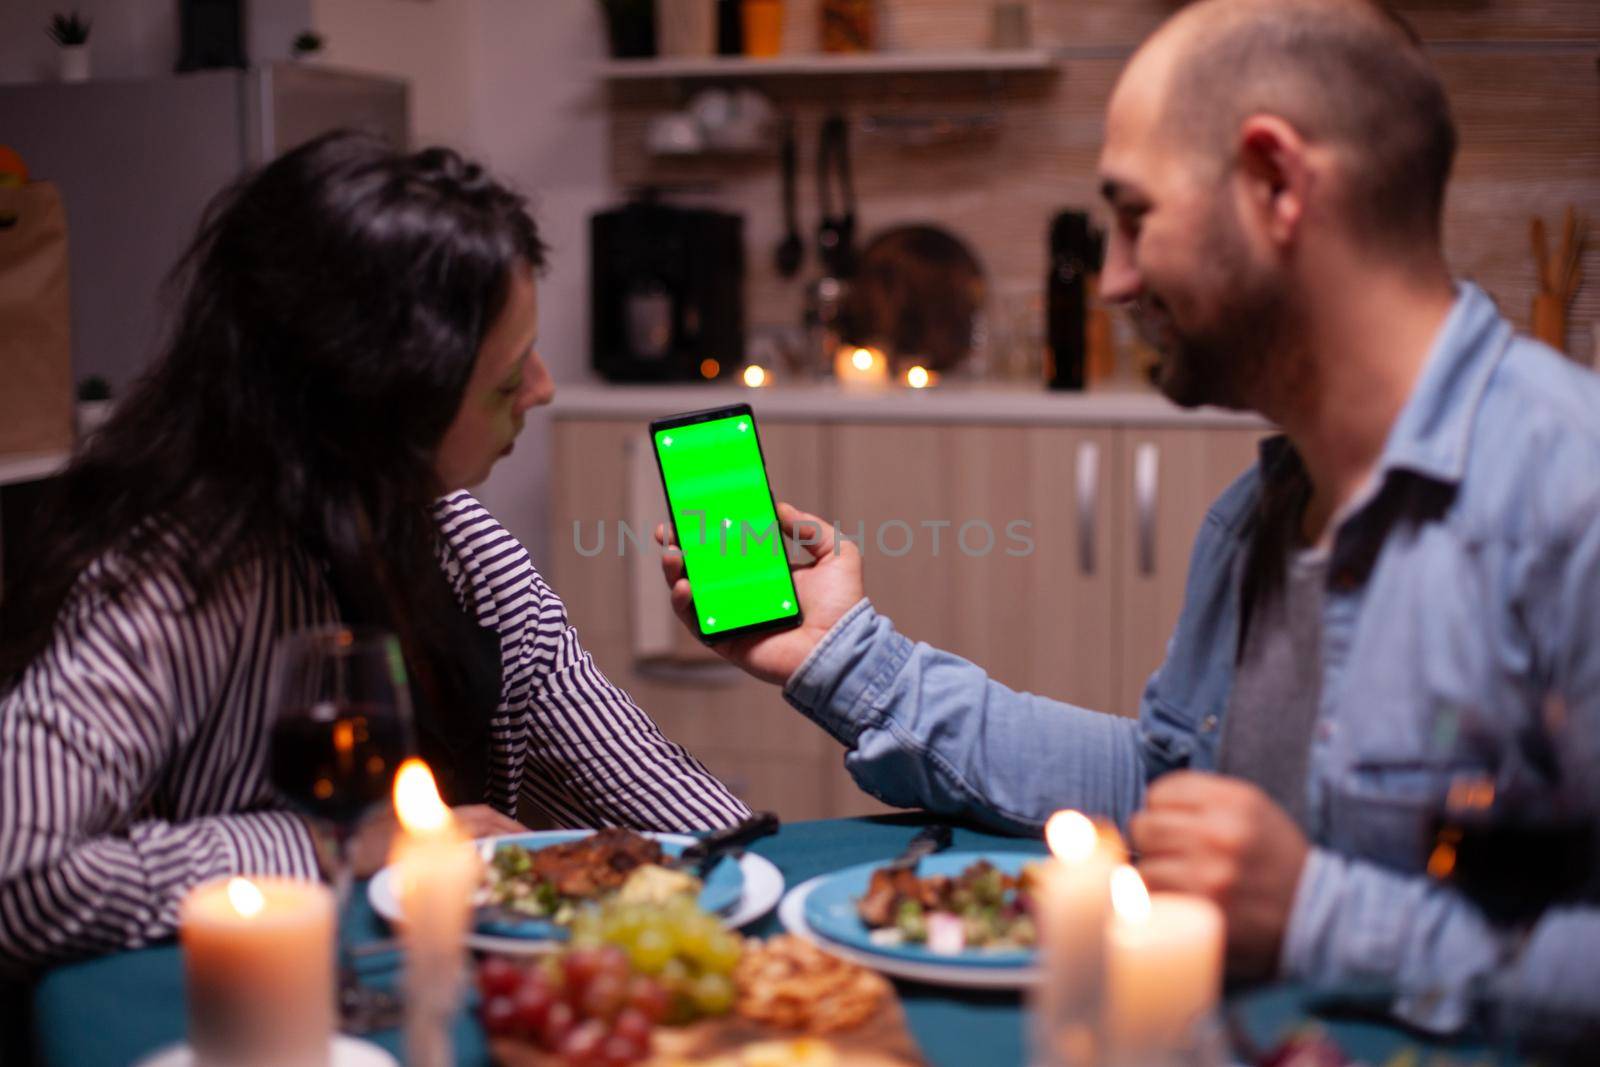 Couple looking at phone with green mock up having romantic dinner. Happy holding phone green screen template chroma key isolated smartphone display using technology internet.